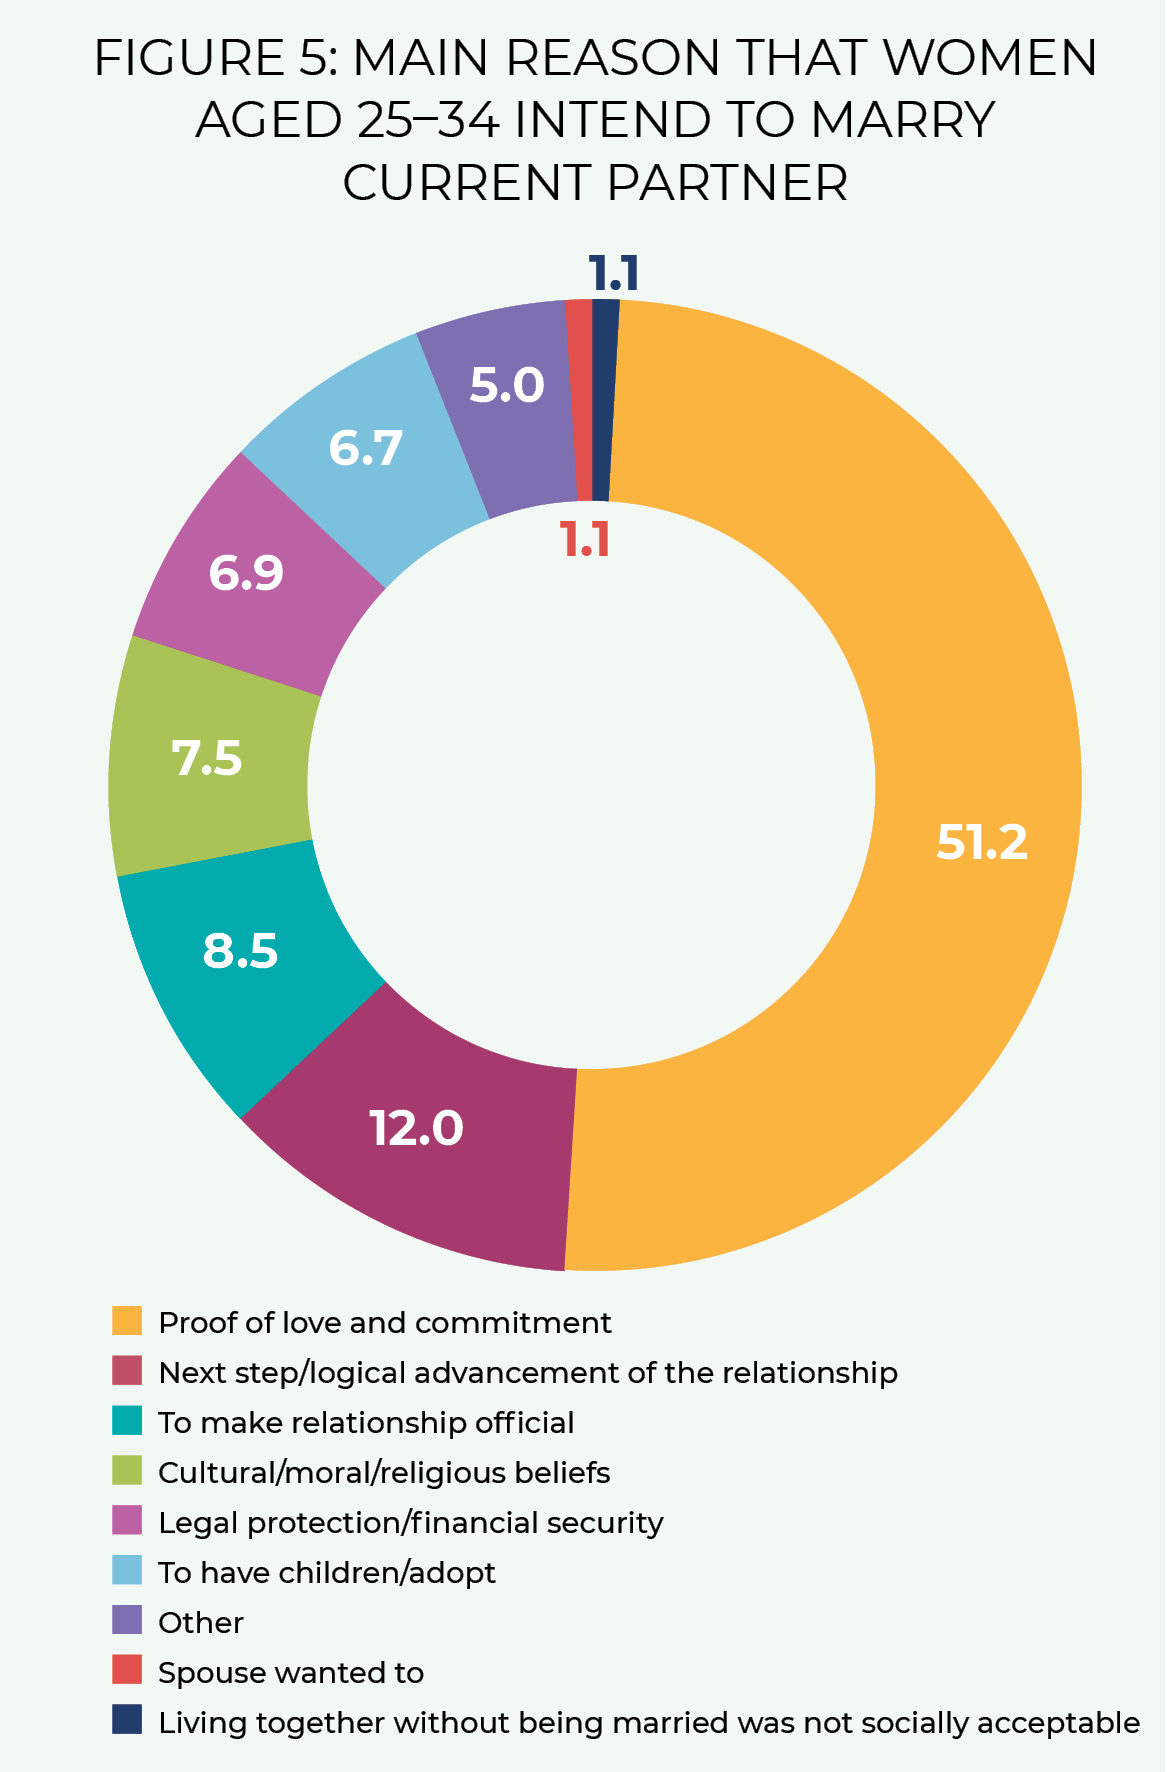 FIGURE 5: MAIN REASON THAT WOMEN AGED 25–34 INTEND TO MARRY CURRENT PARTNER